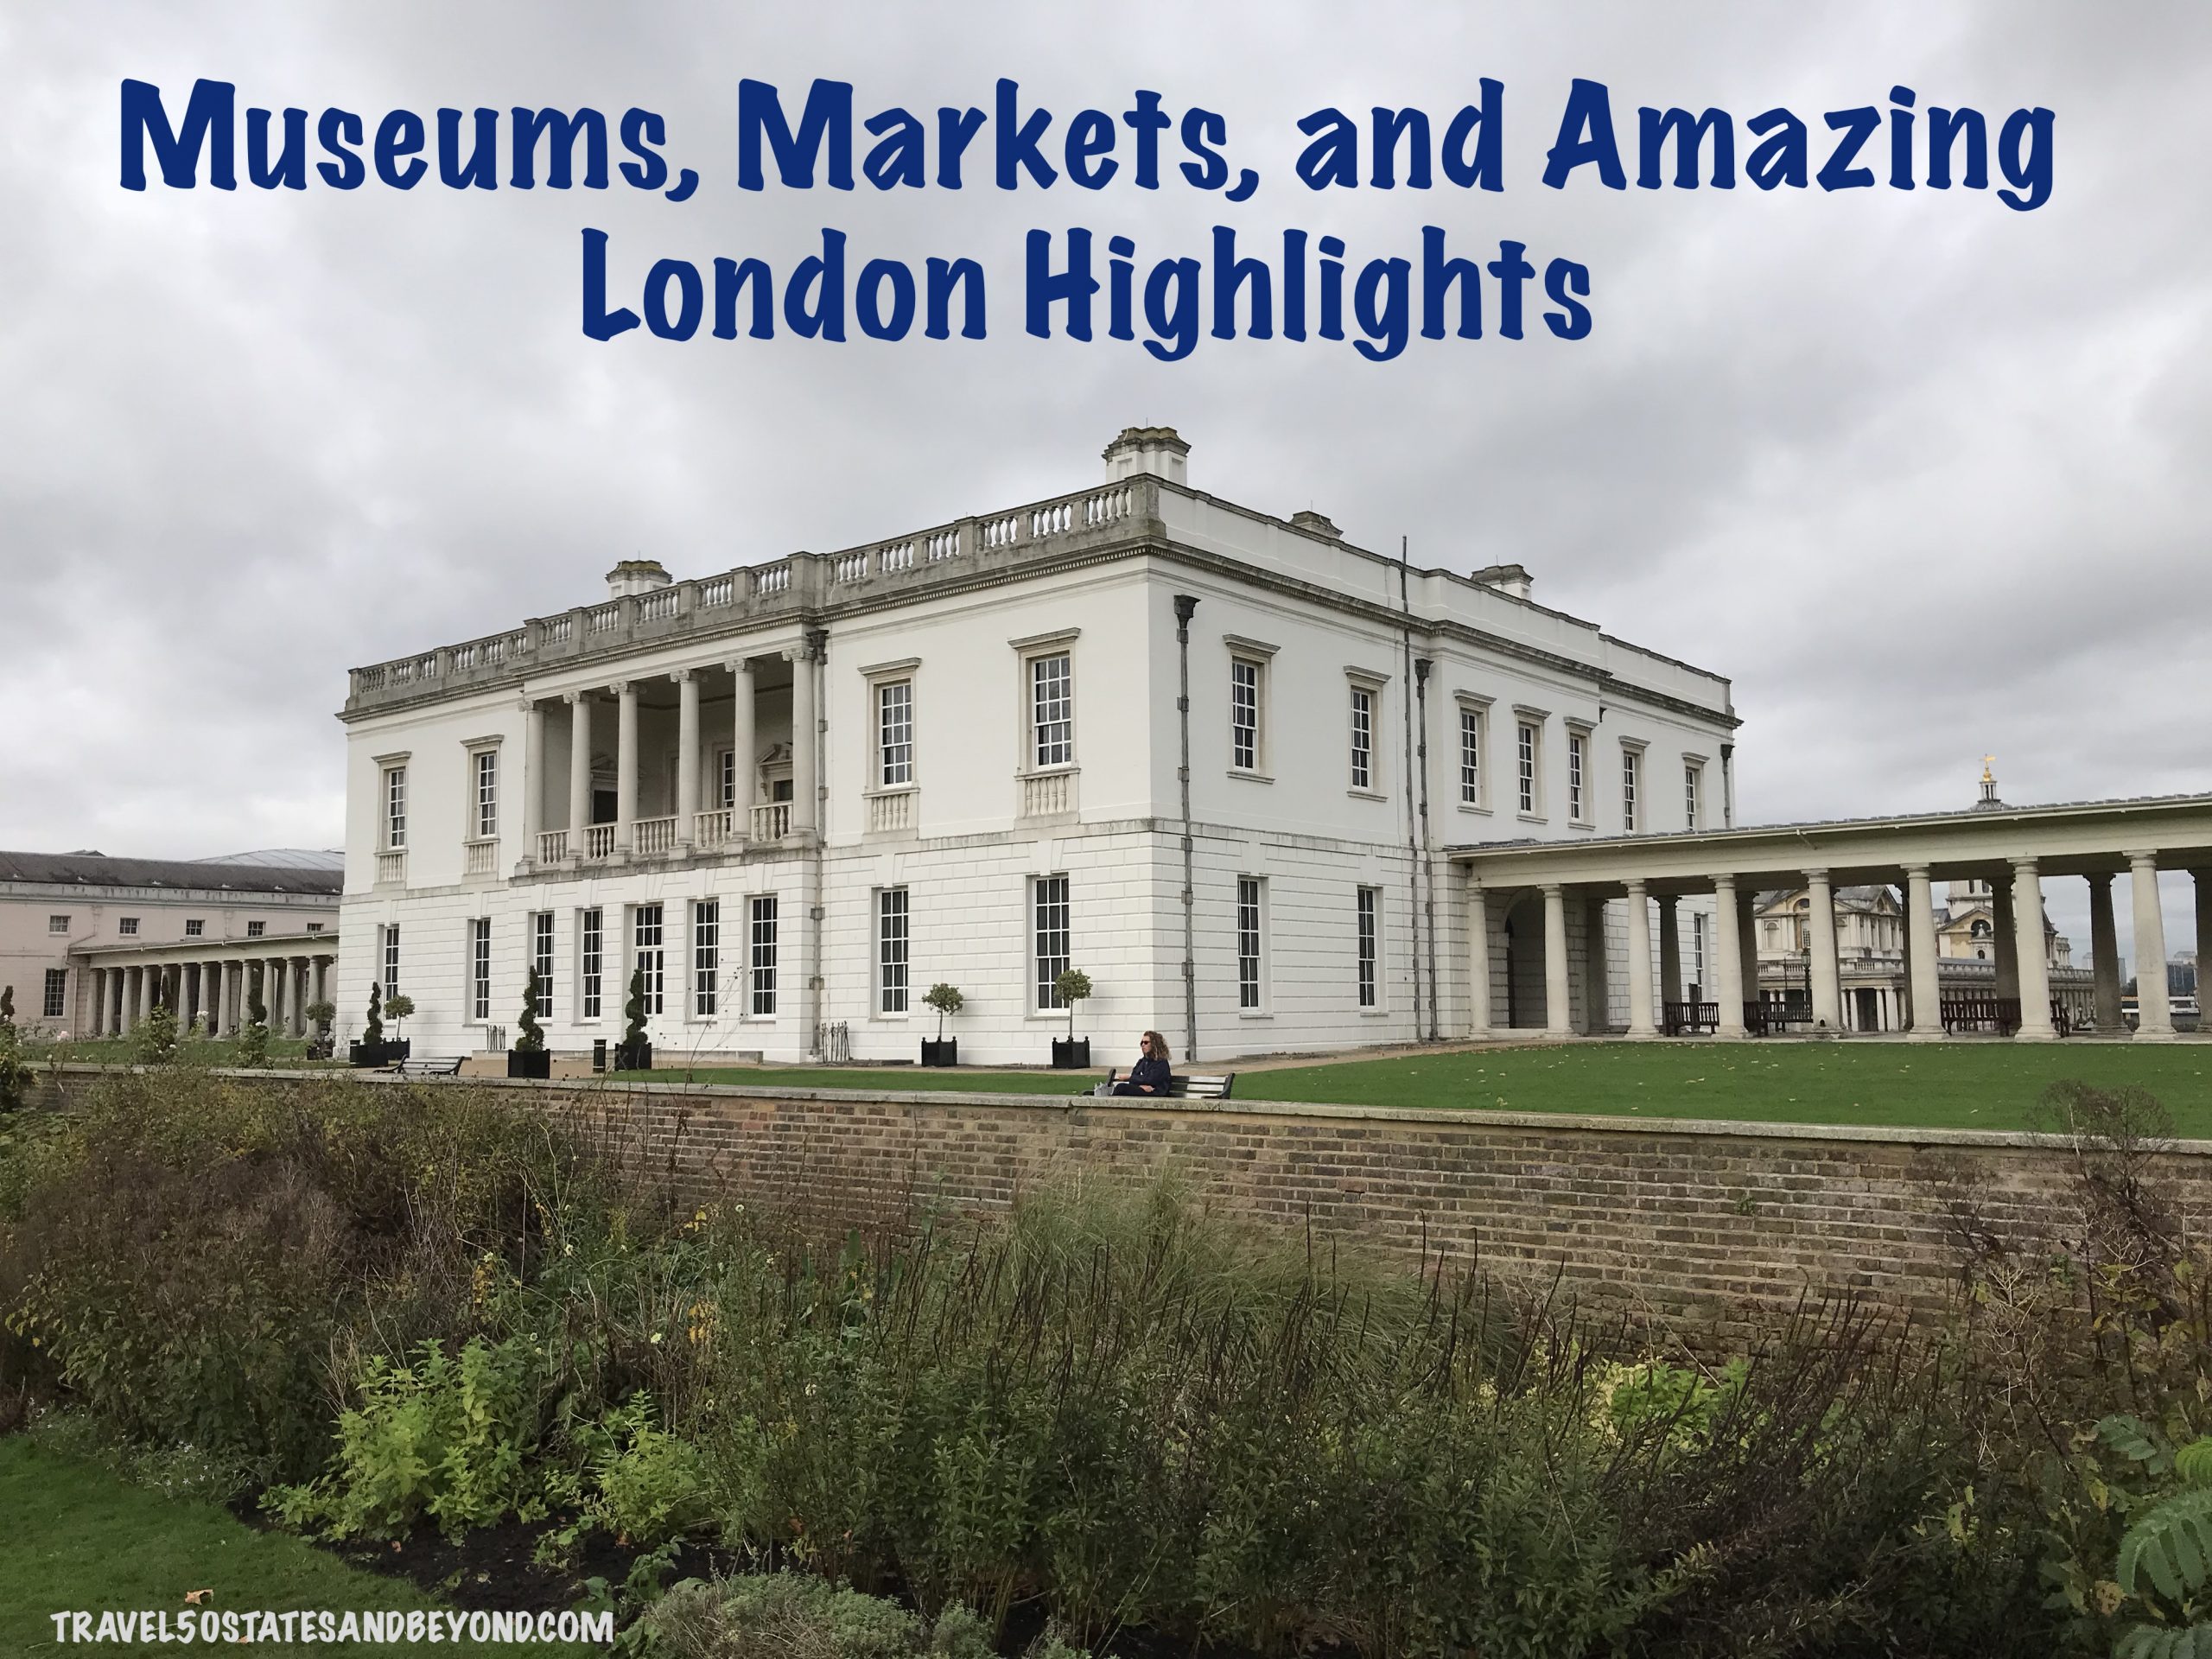 Markets, Museums, & Amazing London Highlights